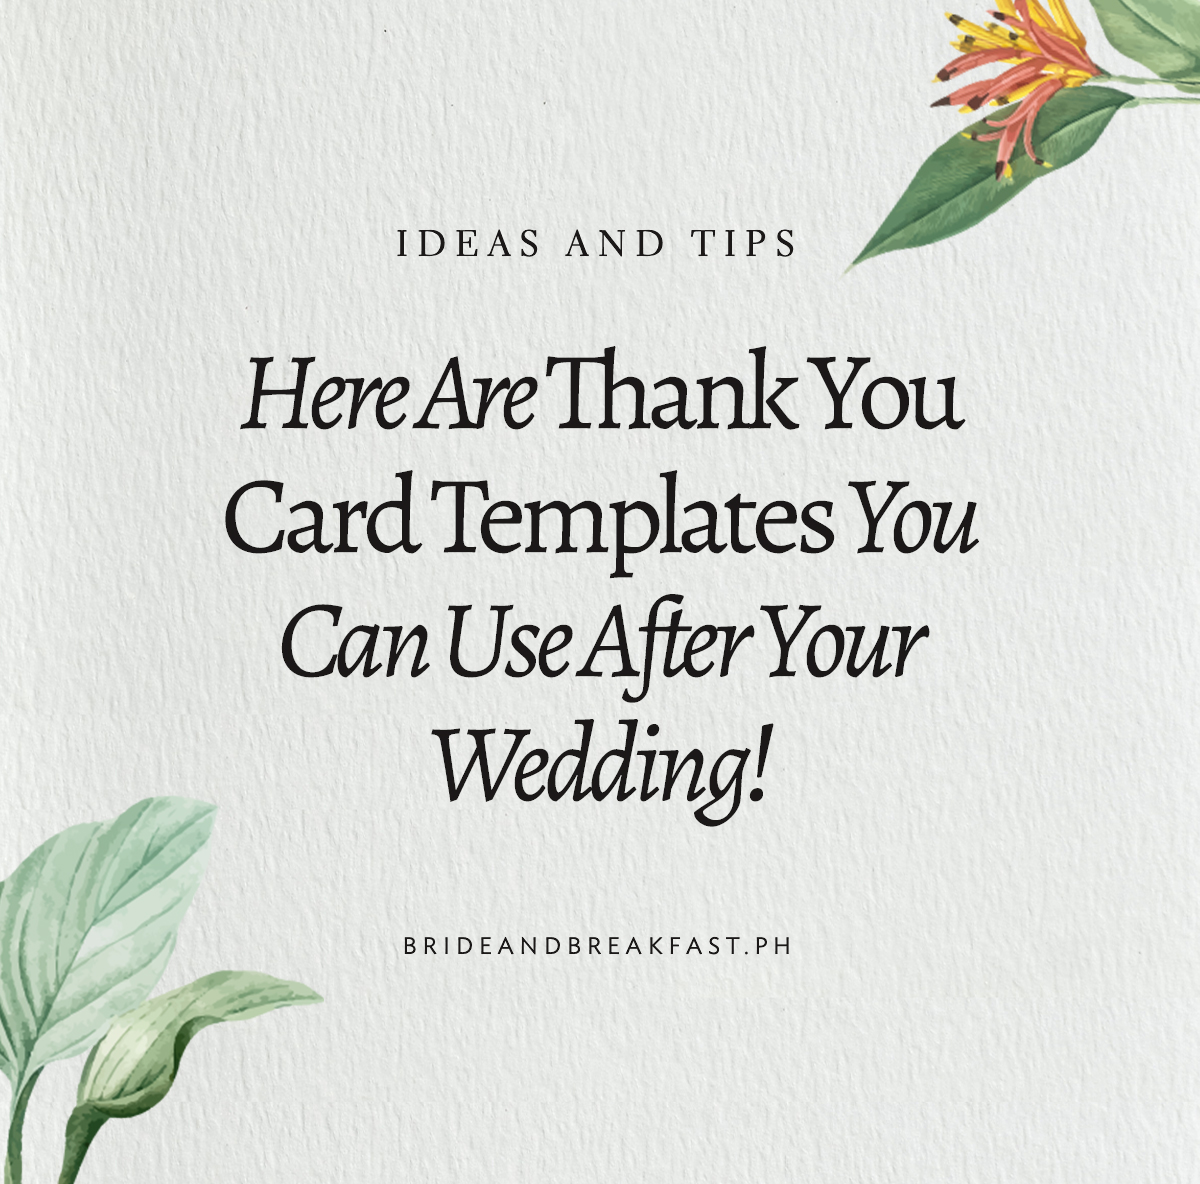 Thank You Card Templates Philippines Wedding Blog